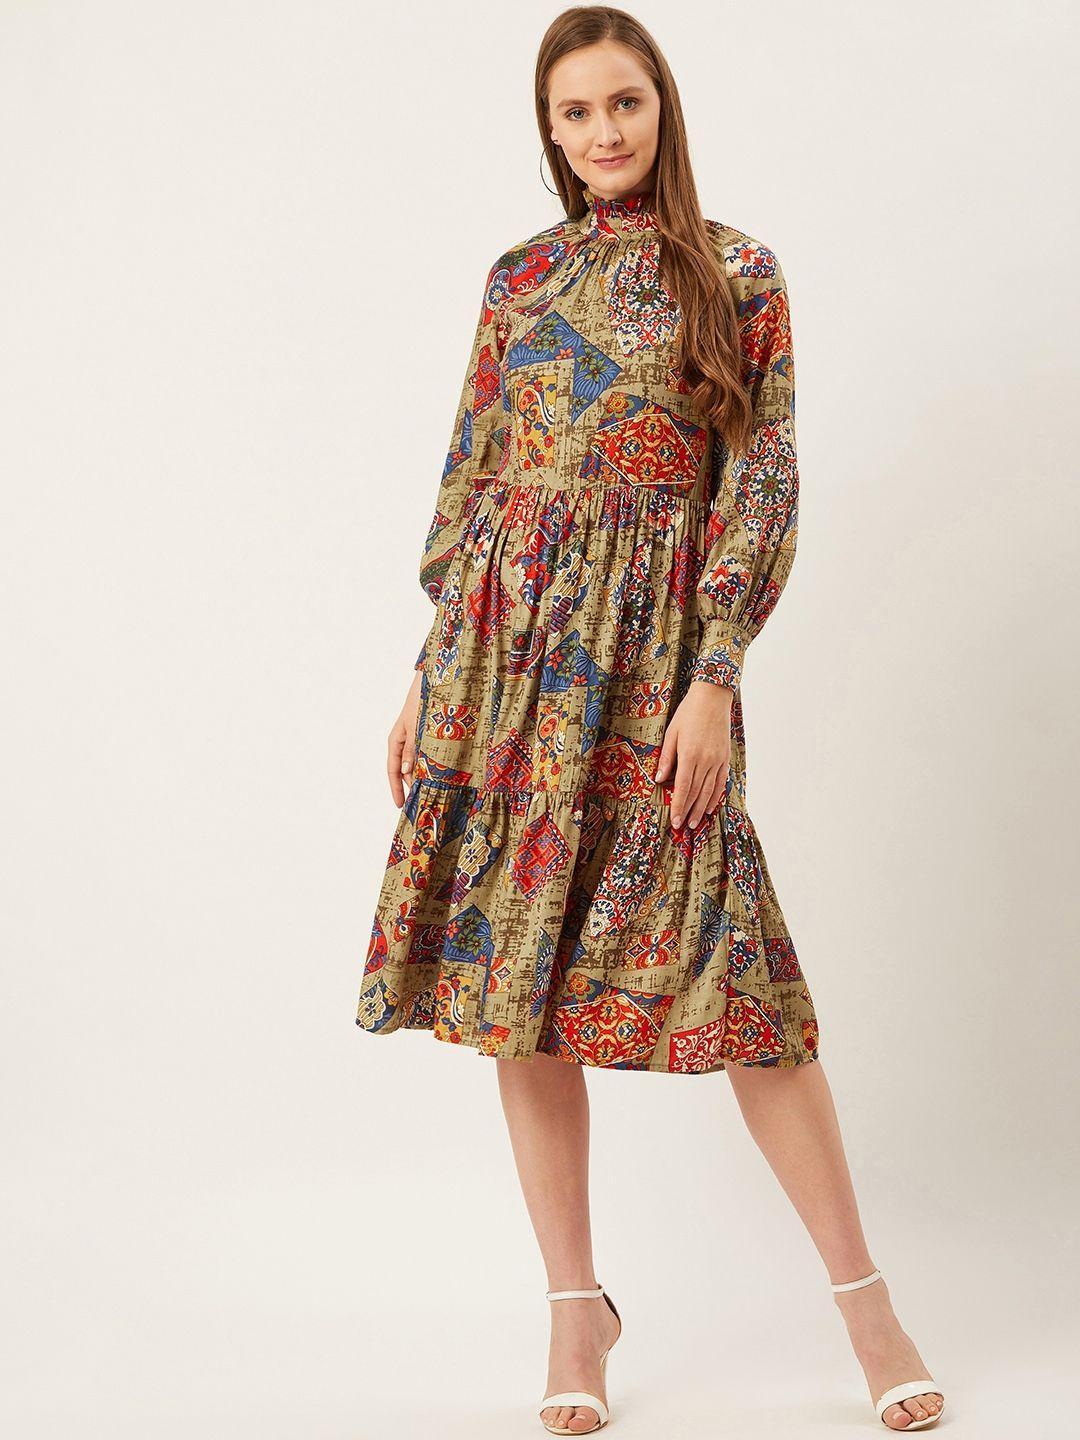 alsace lorraine paris women olive green & red printed a-line tiered dress